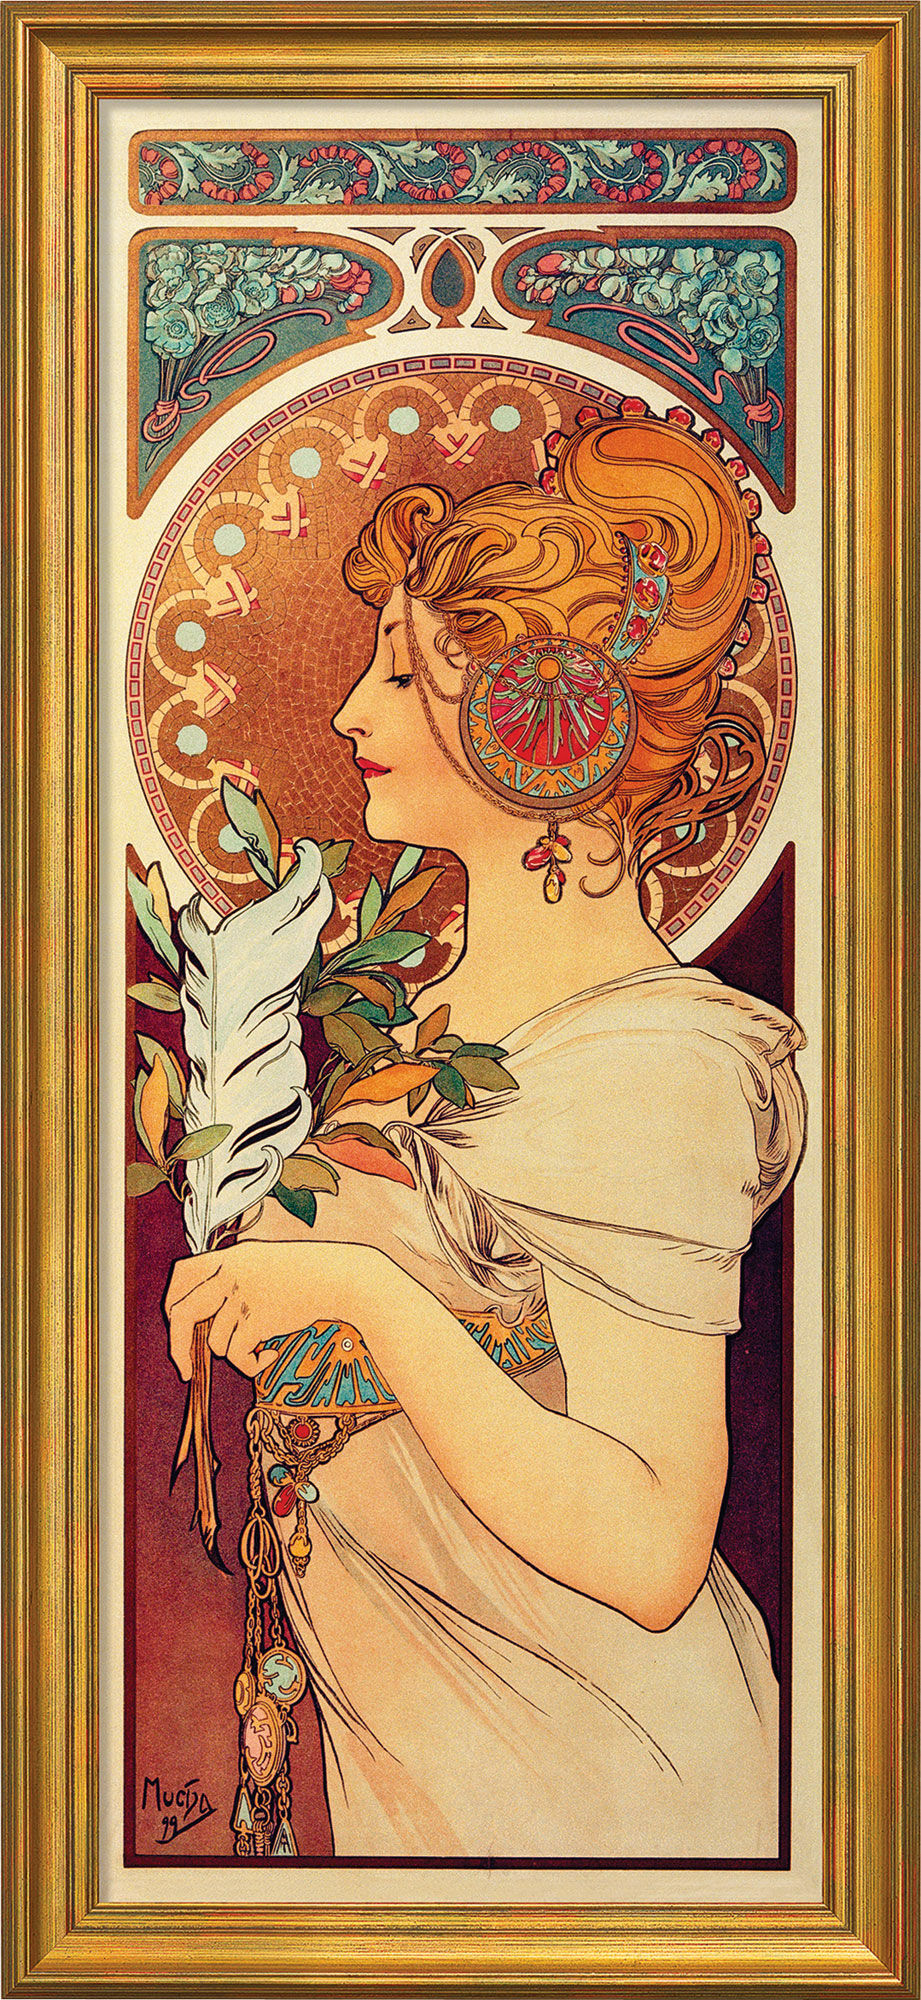 Picture "La Plume" (1899), framed by Alphonse Mucha